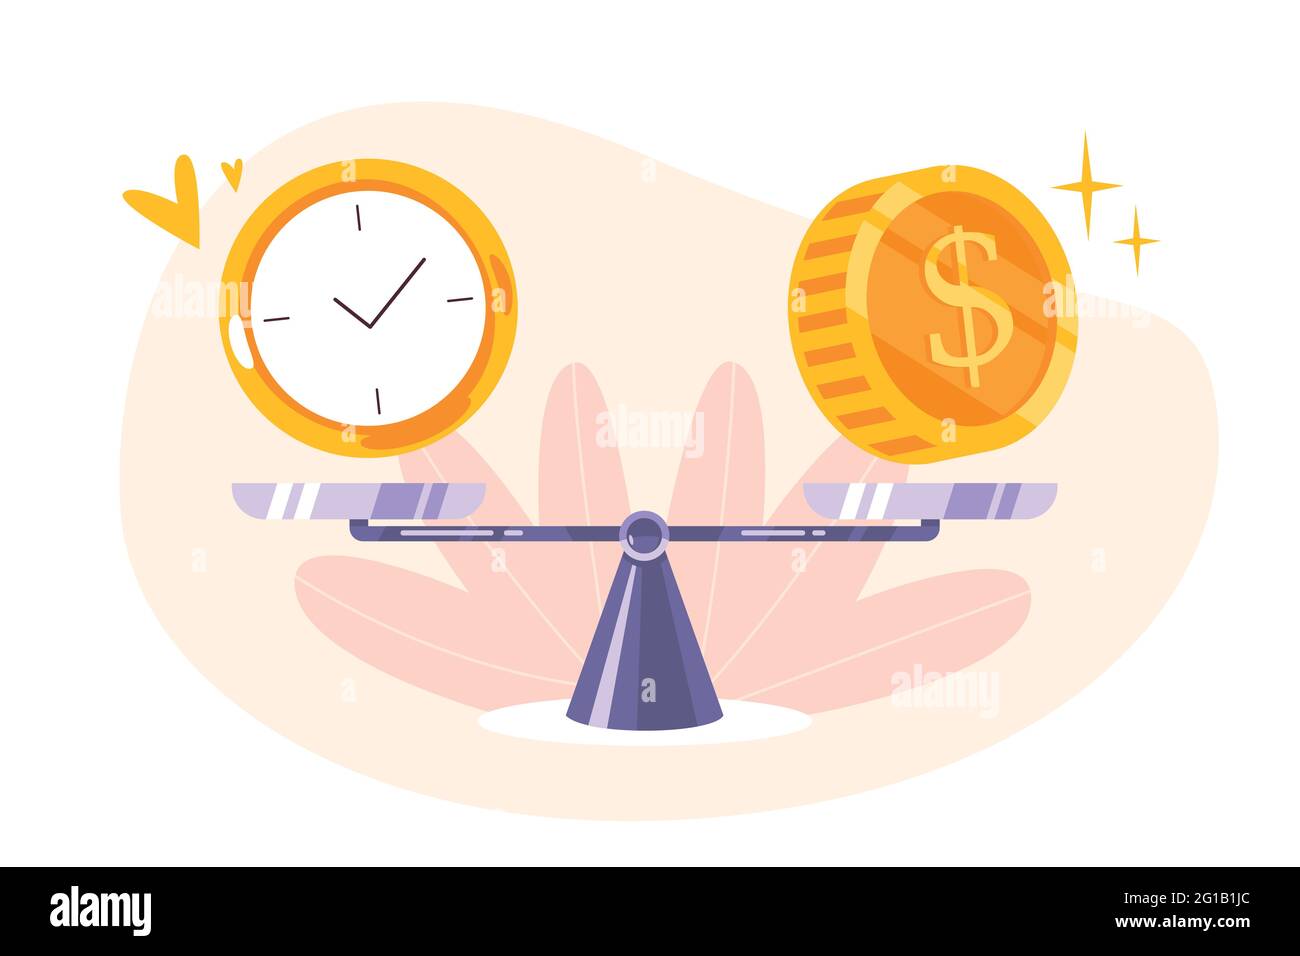 Time is money balance on scale icon. Concept of time management, economy and investment. Comparison work and value, financial profit. Vector flat illustration of coins, cash and watch on seesaw. Stock Vector